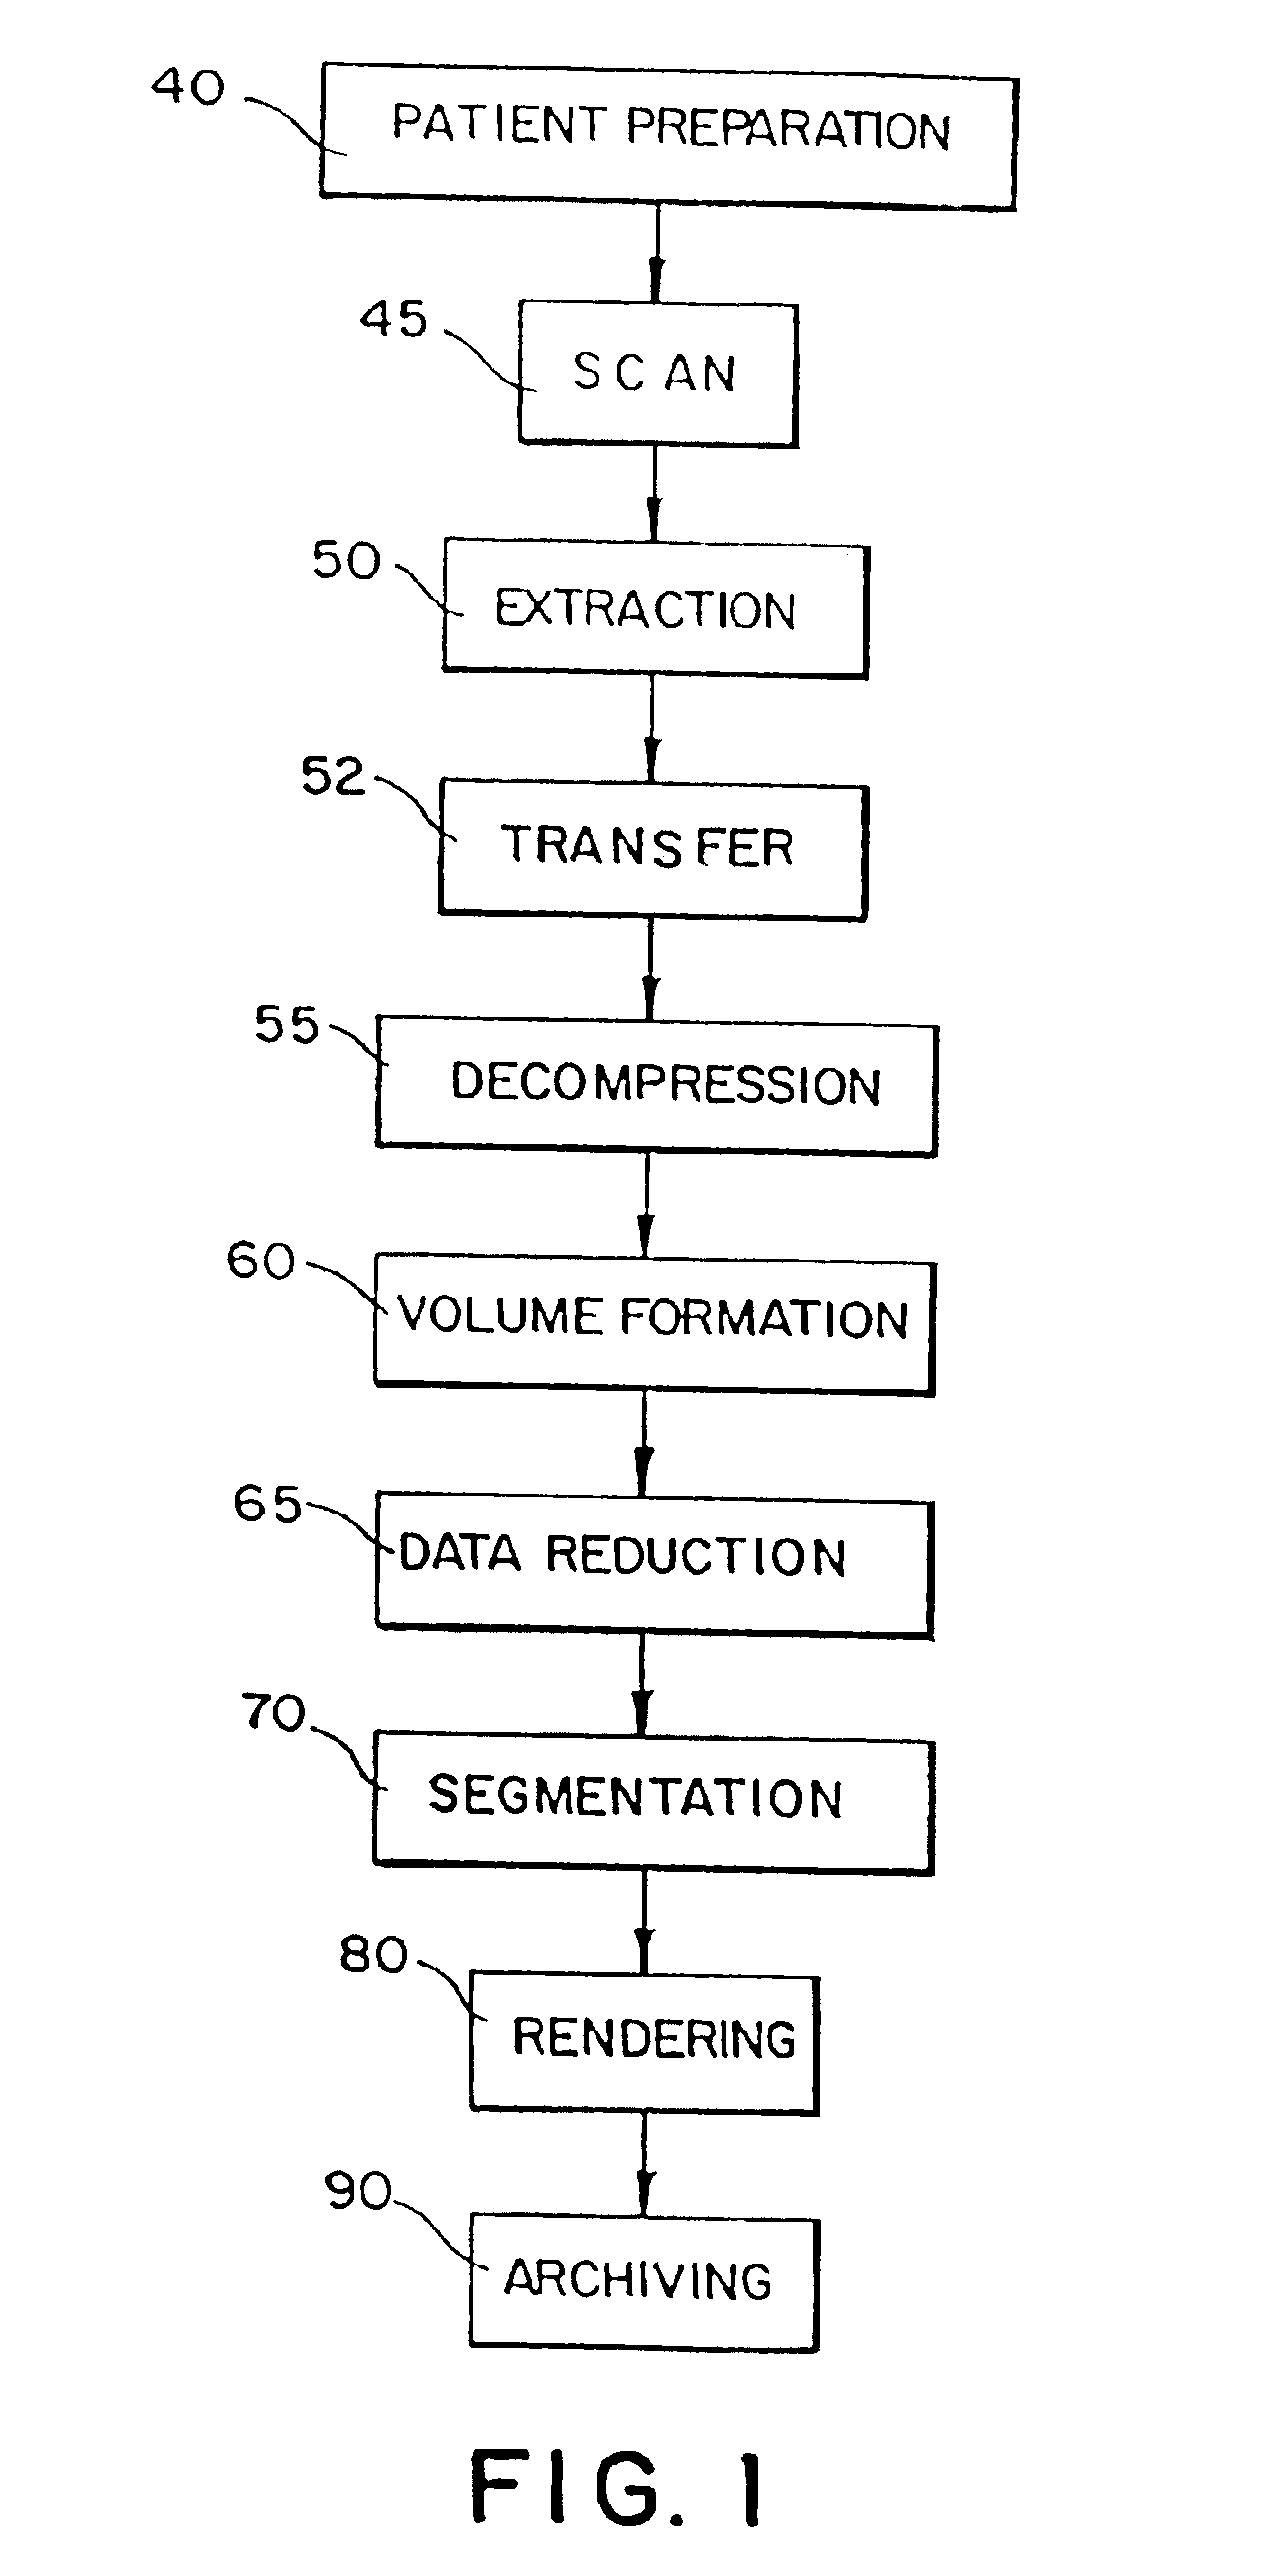 Method and system for producing interactive three-dimensional renderings of selected body organs having hollow lumens to enable simulated movement through the lumen